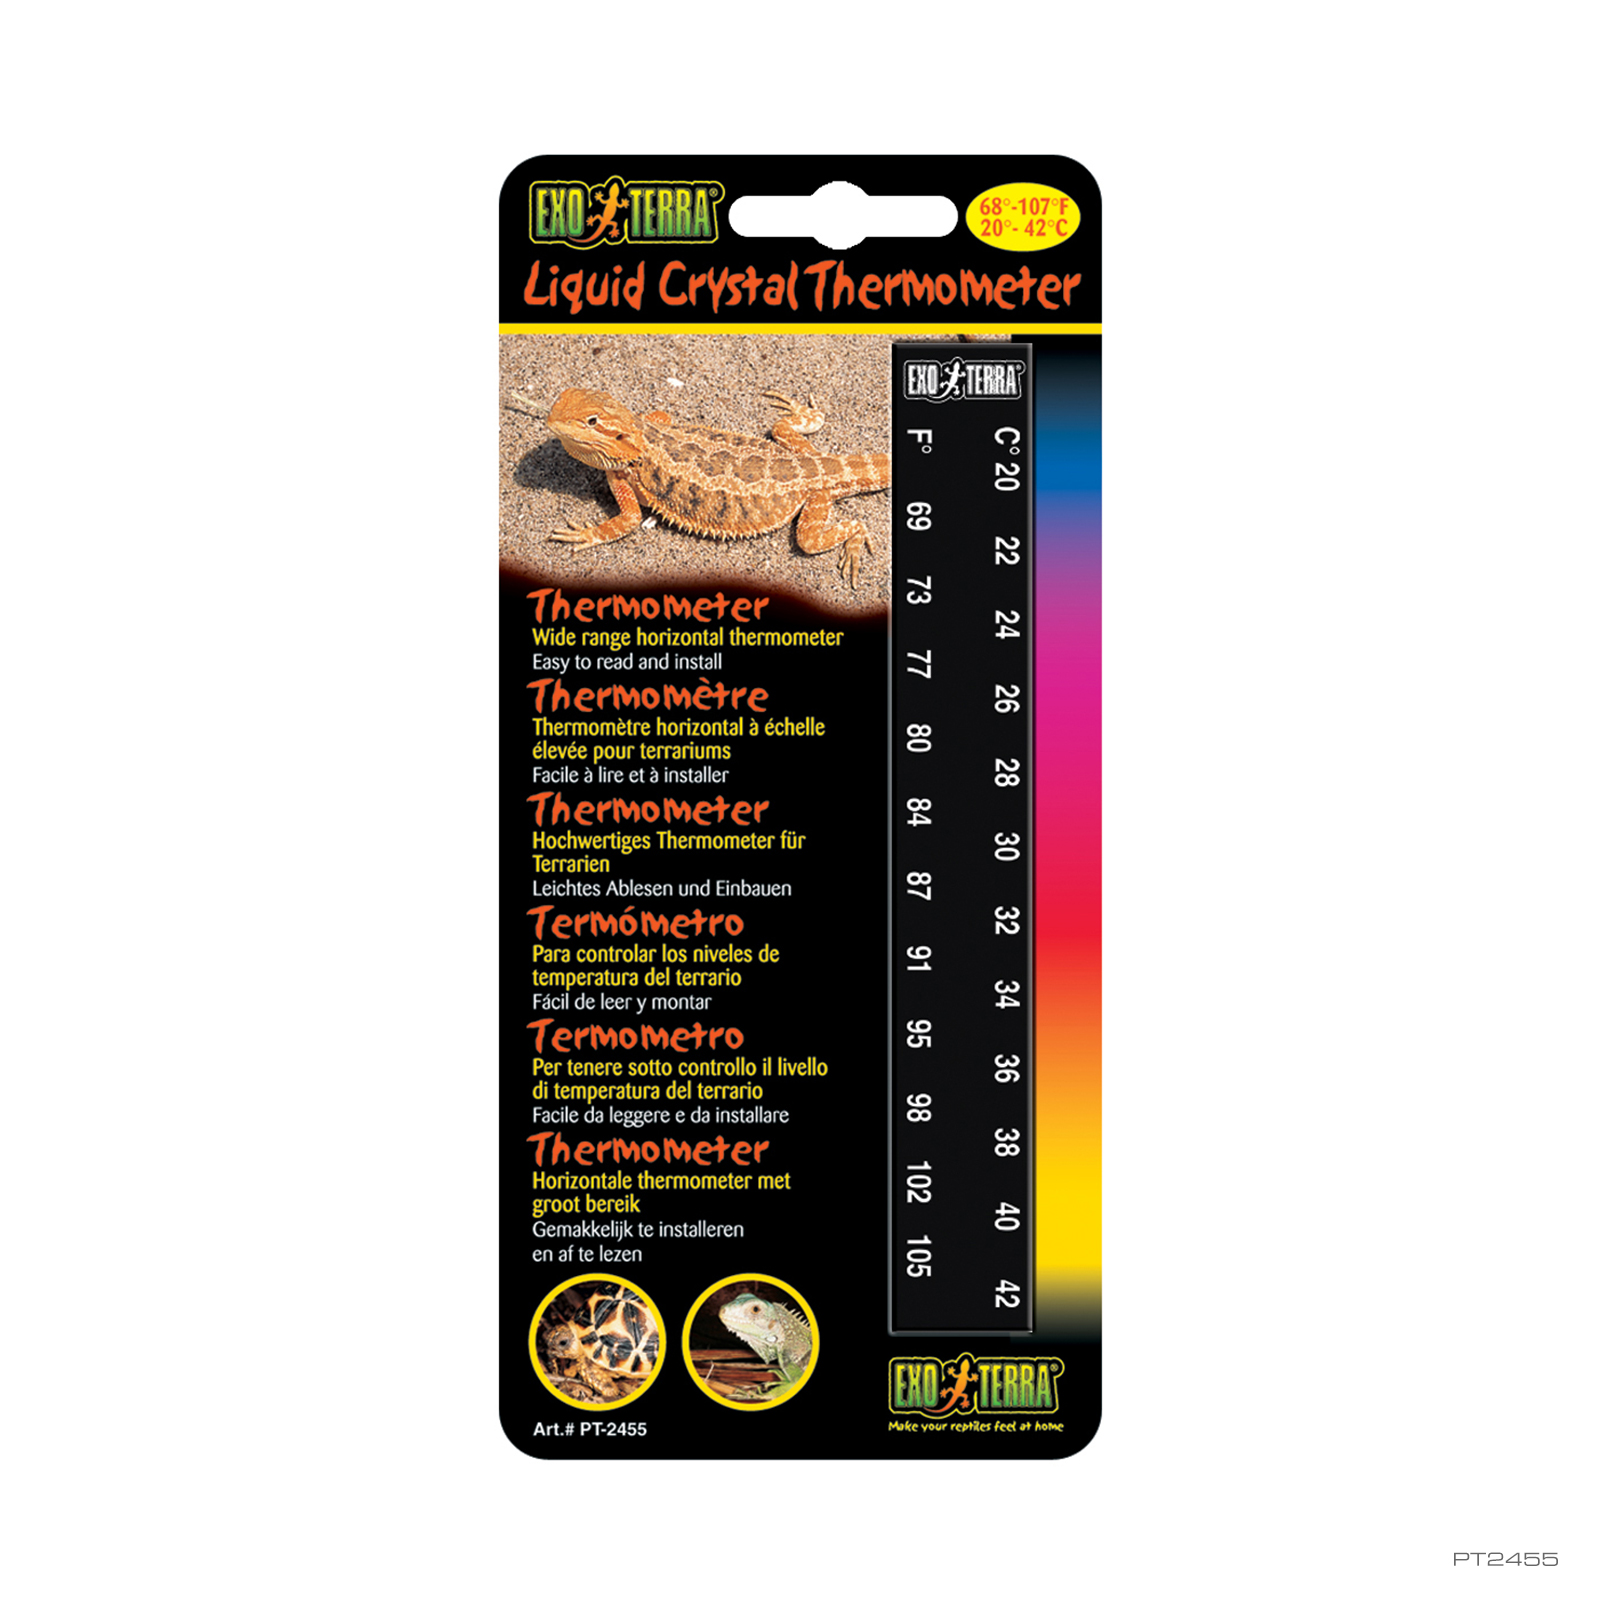 Thermometer for the Vivarium: A Complete Guide